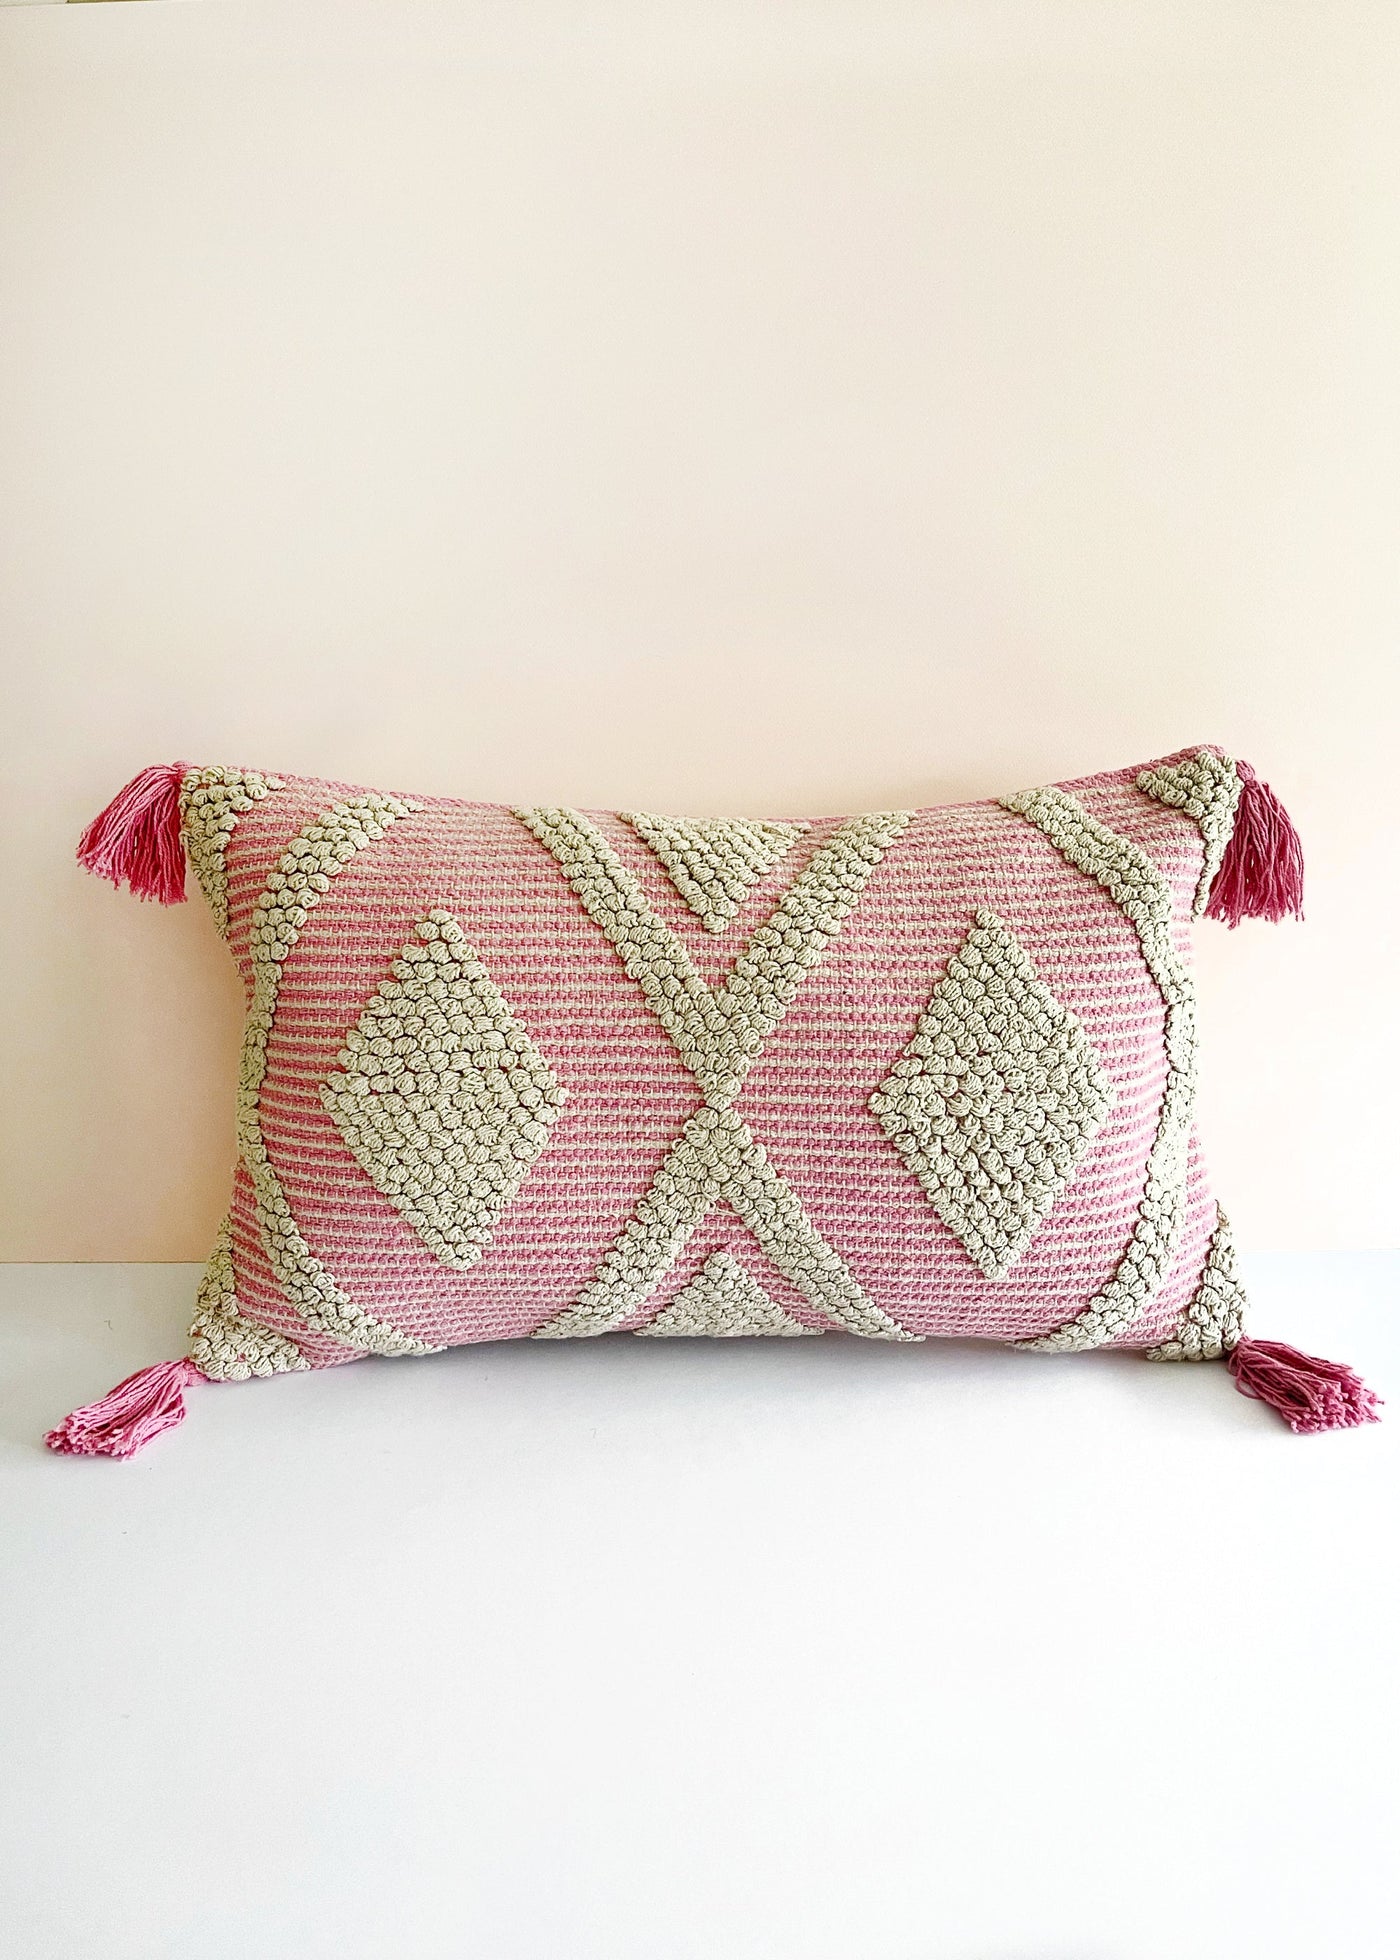 In-Haus Cushion - Woven Natural & Camelia Knot